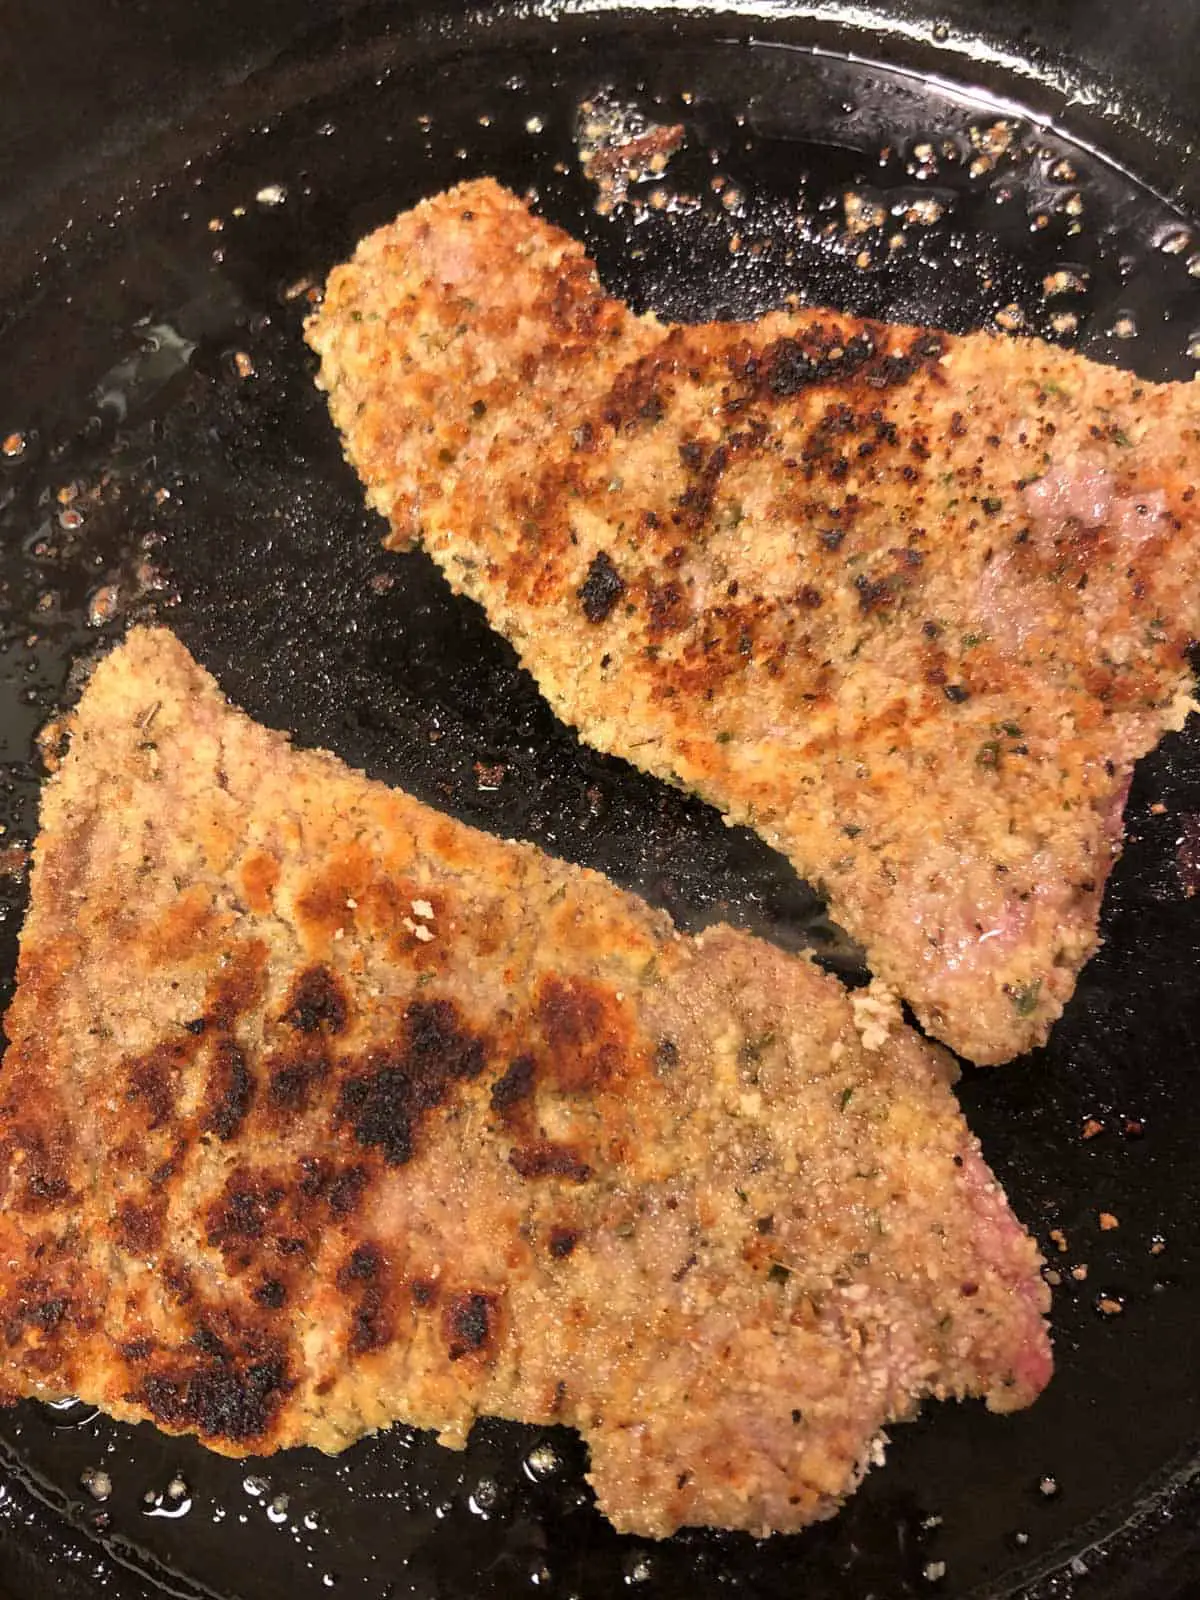 Two breaded veal cutlets that have been cooked in a cast iron pan.